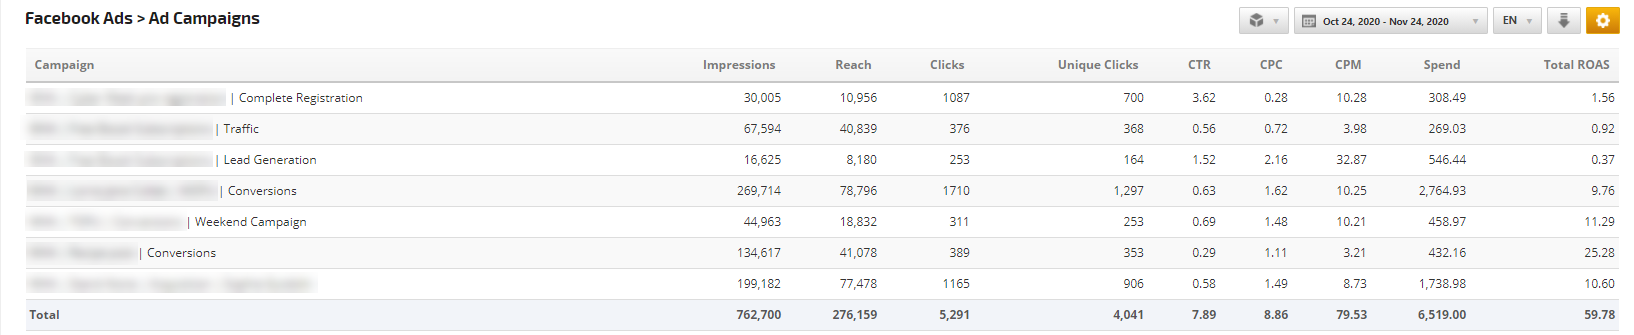 Facebook Ads Campaigns Report Table 